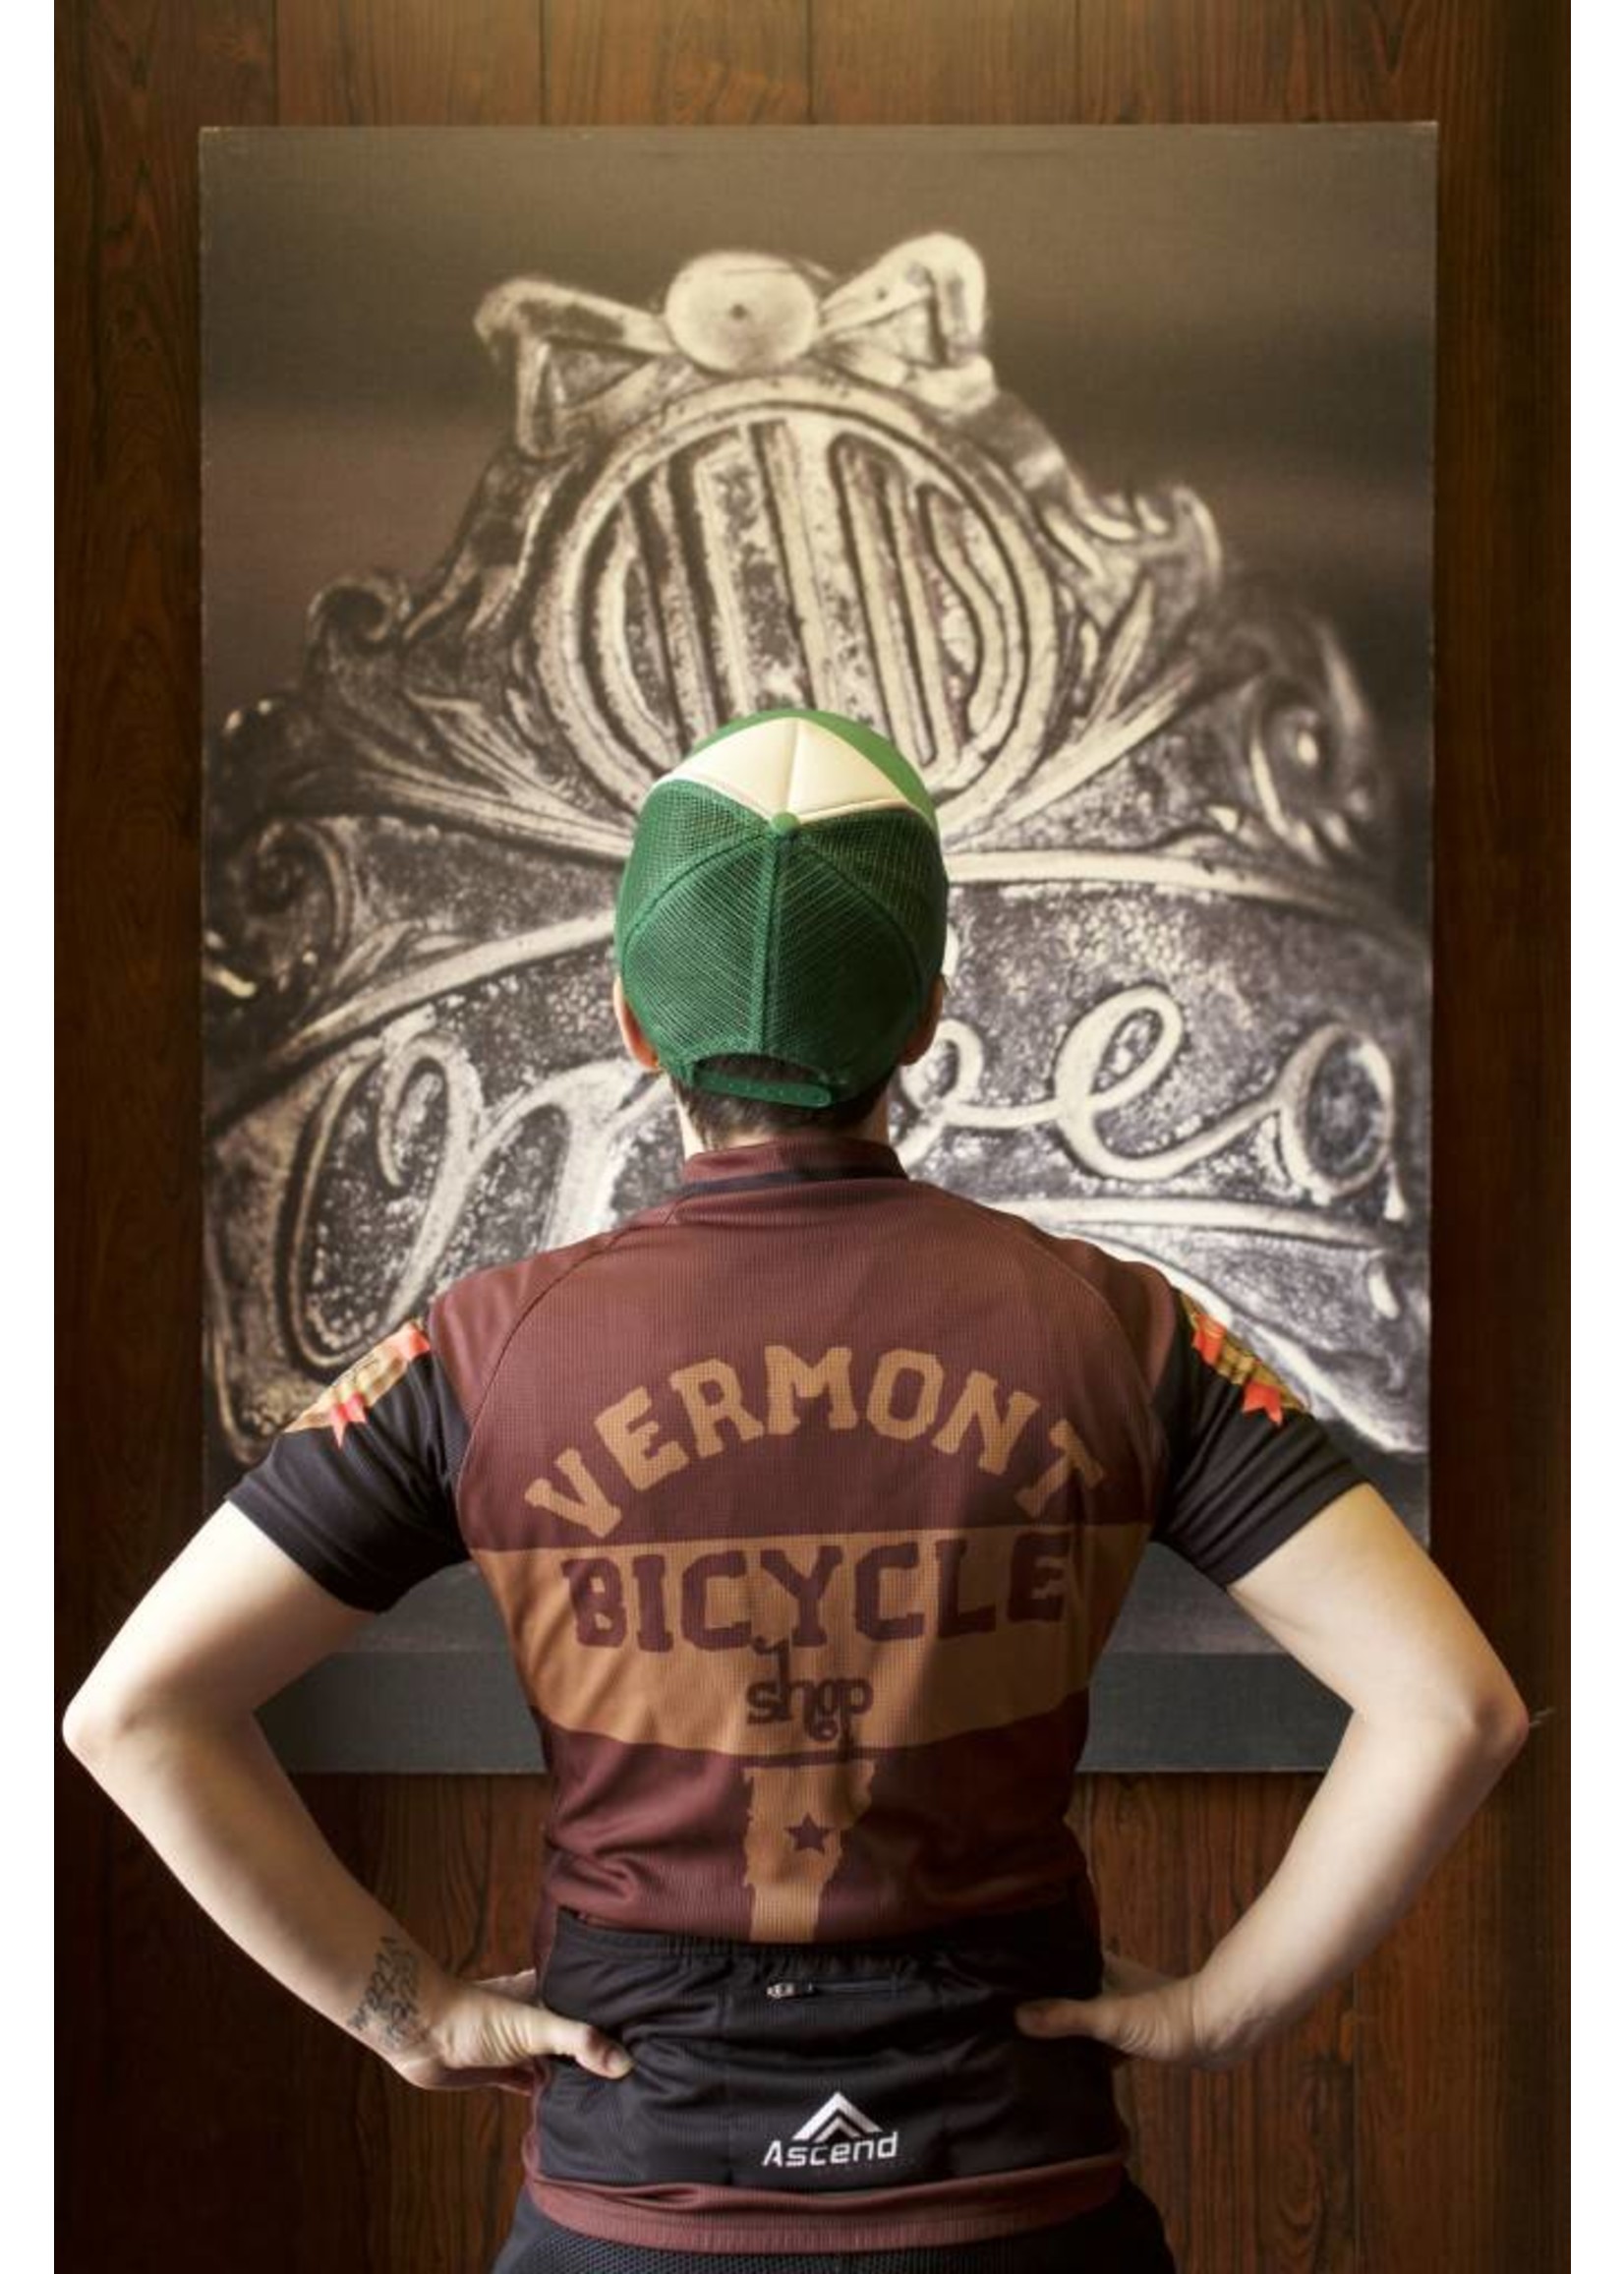 Vermont Bicycle Shop Vermont Bicycle Shop Jersey